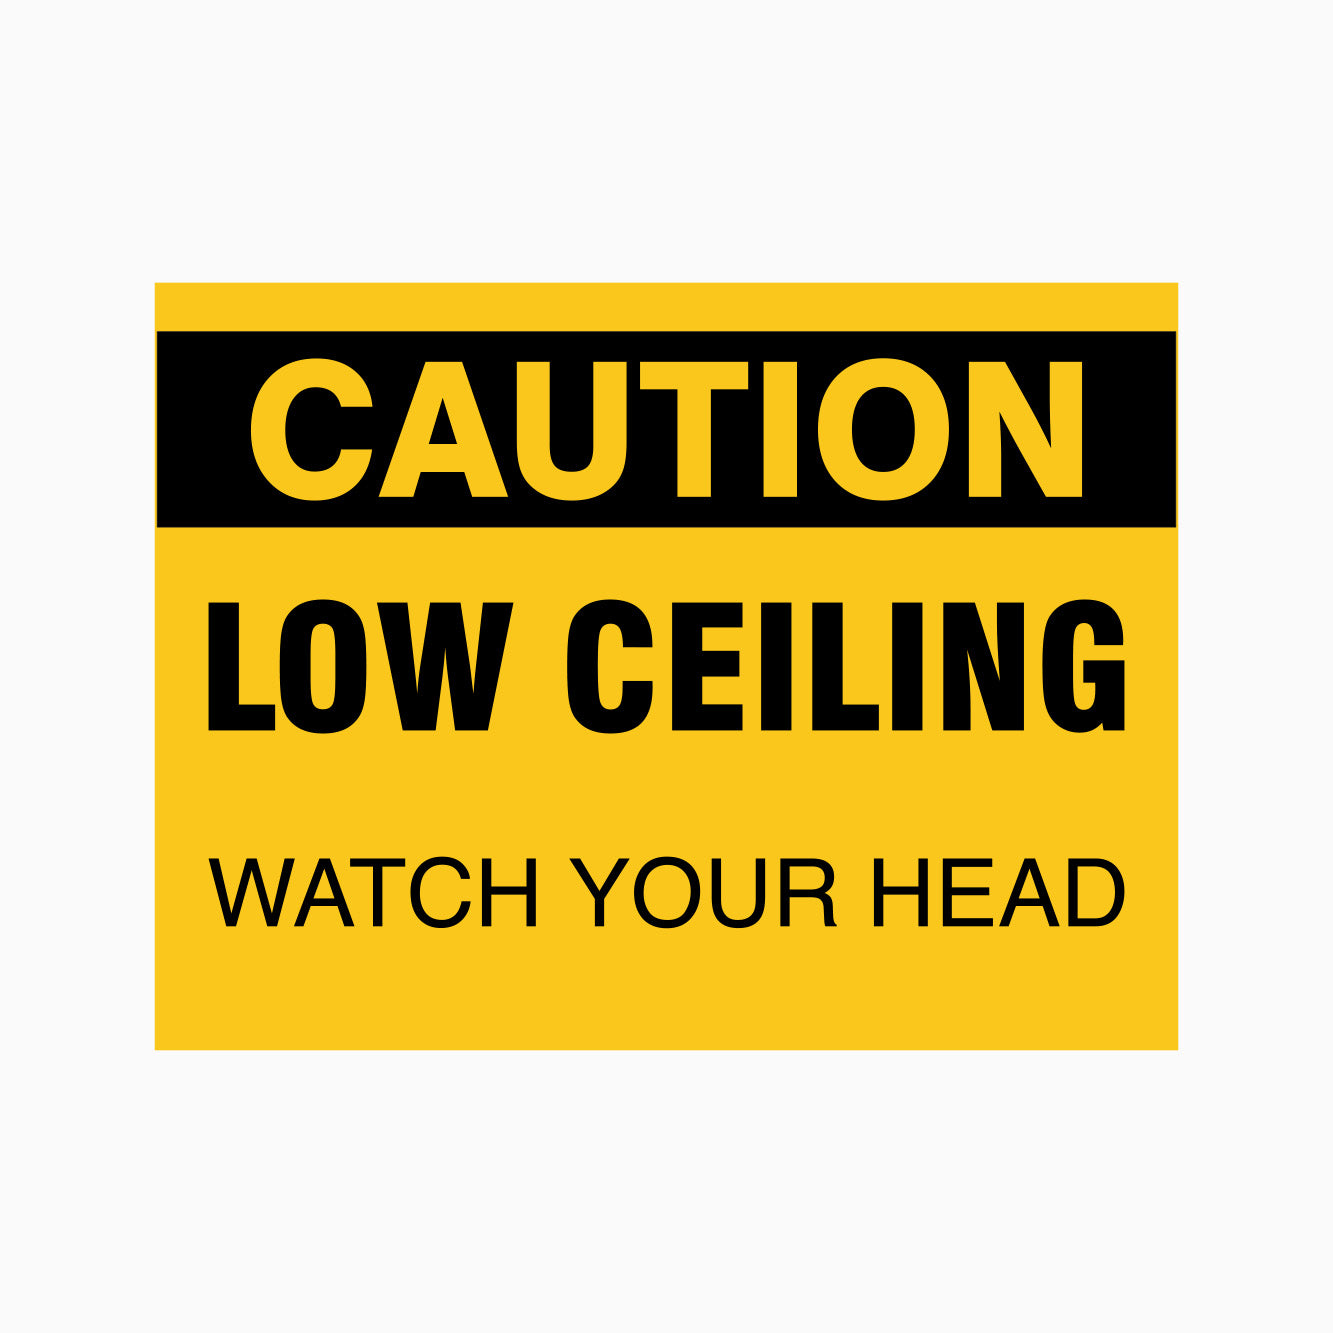 CAUTION LOW CEILING WATCH YOUR HEAD SIGN - GET SIGNS